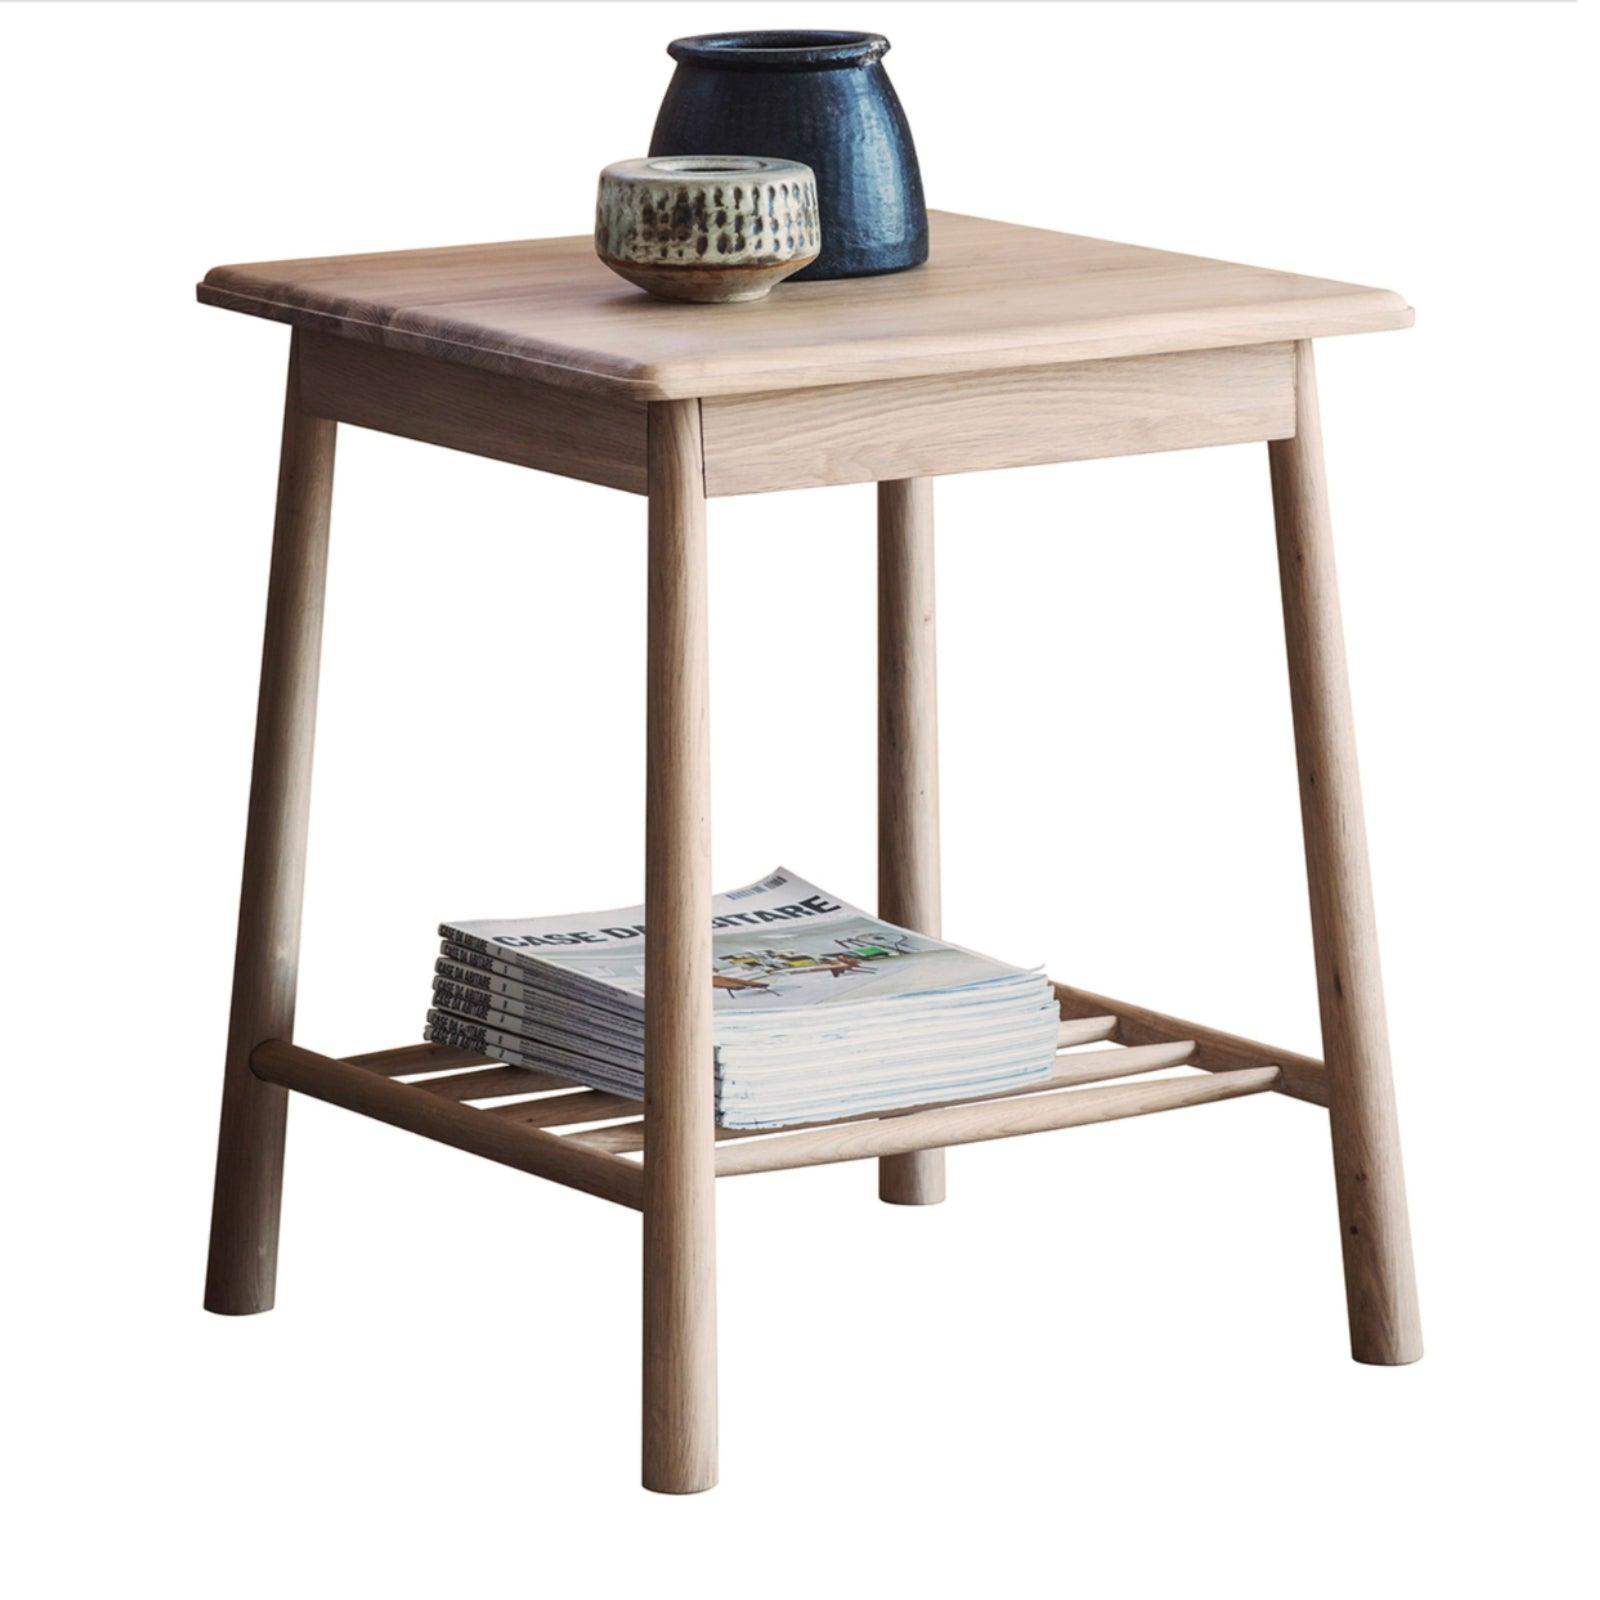 Light Oak Square Spindle Shelf Side Table - The Farthing